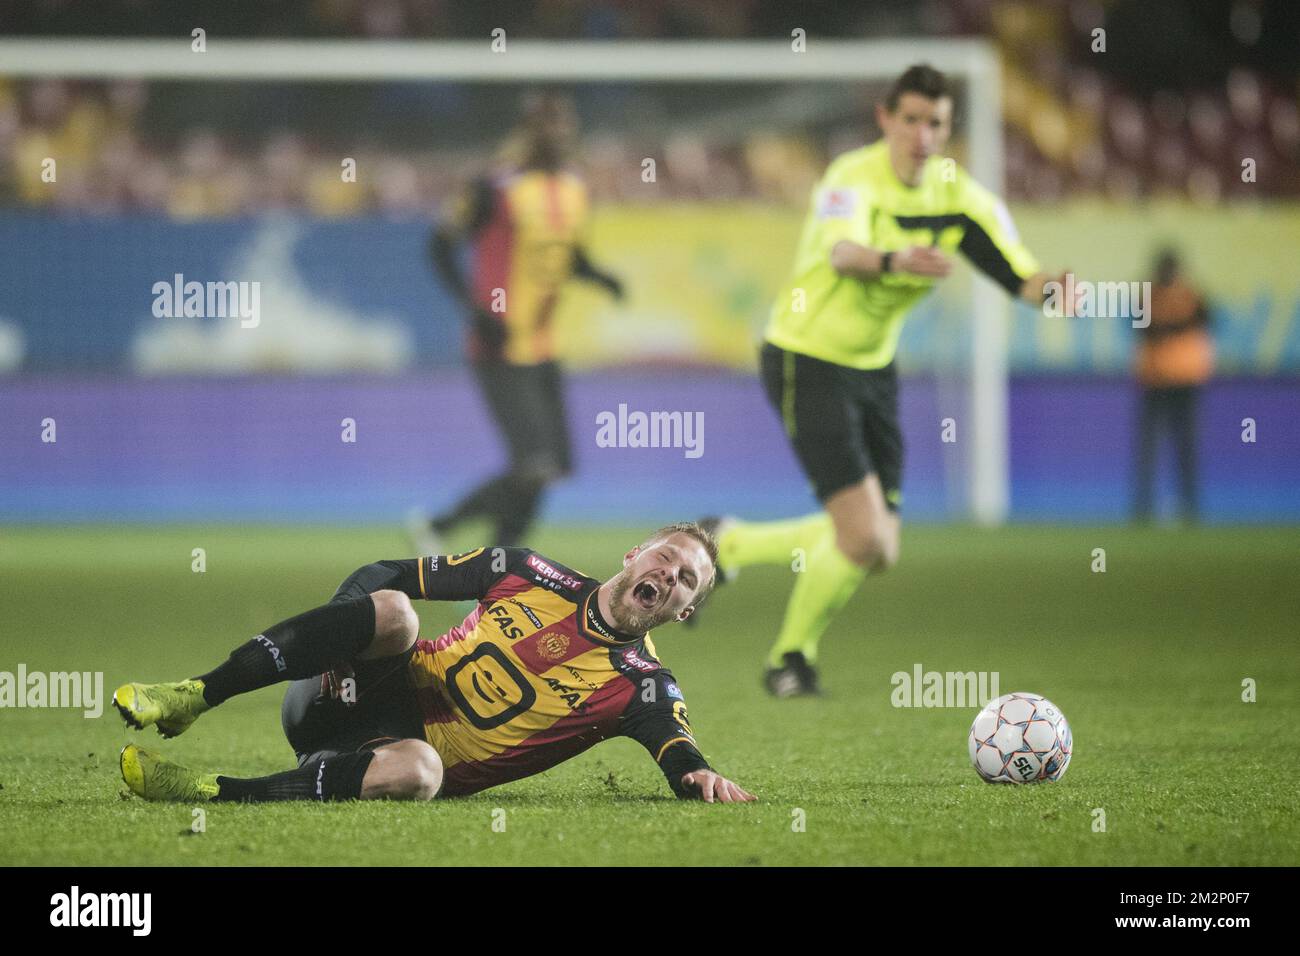 Mechelen's Gustav Engvall lies injured on the ground during a soccer game between KV Mechelen and Roeselare, Friday 18 January 2019 in Mechelen, on the 22nd day of the 'Proximus League' 1B division of the Belgian soccer championship. BELGA PHOTO JASPER JACOBS Stock Photo